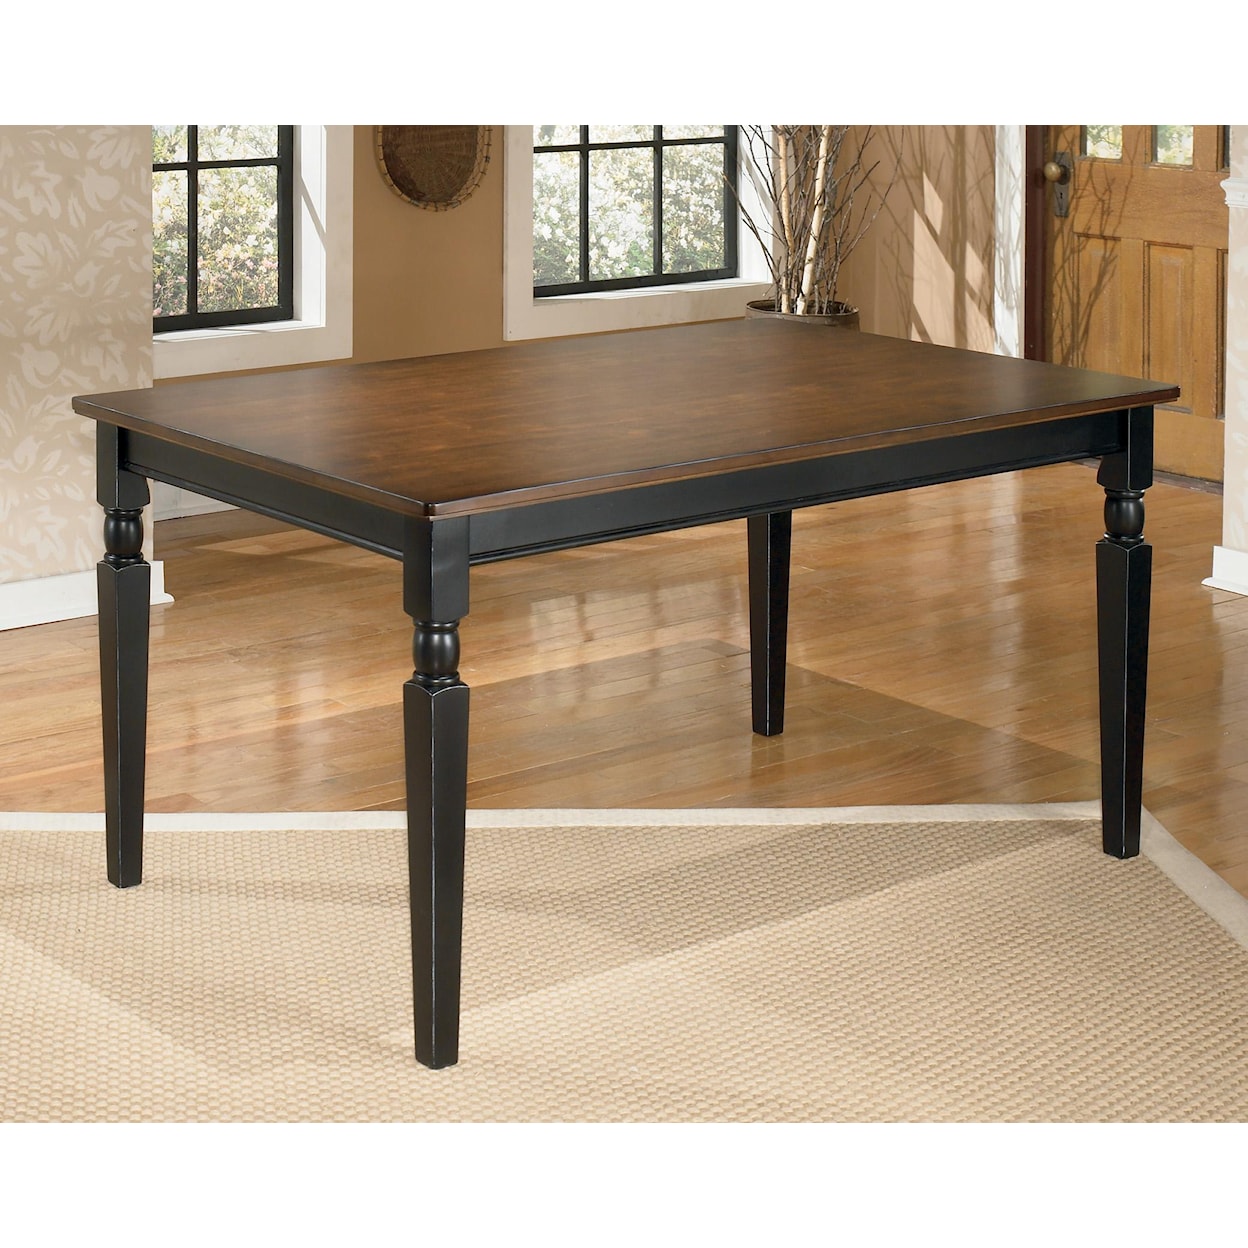 Signature Design by Ashley Owingsville 6-Piece Rectangular Table Set with Bench